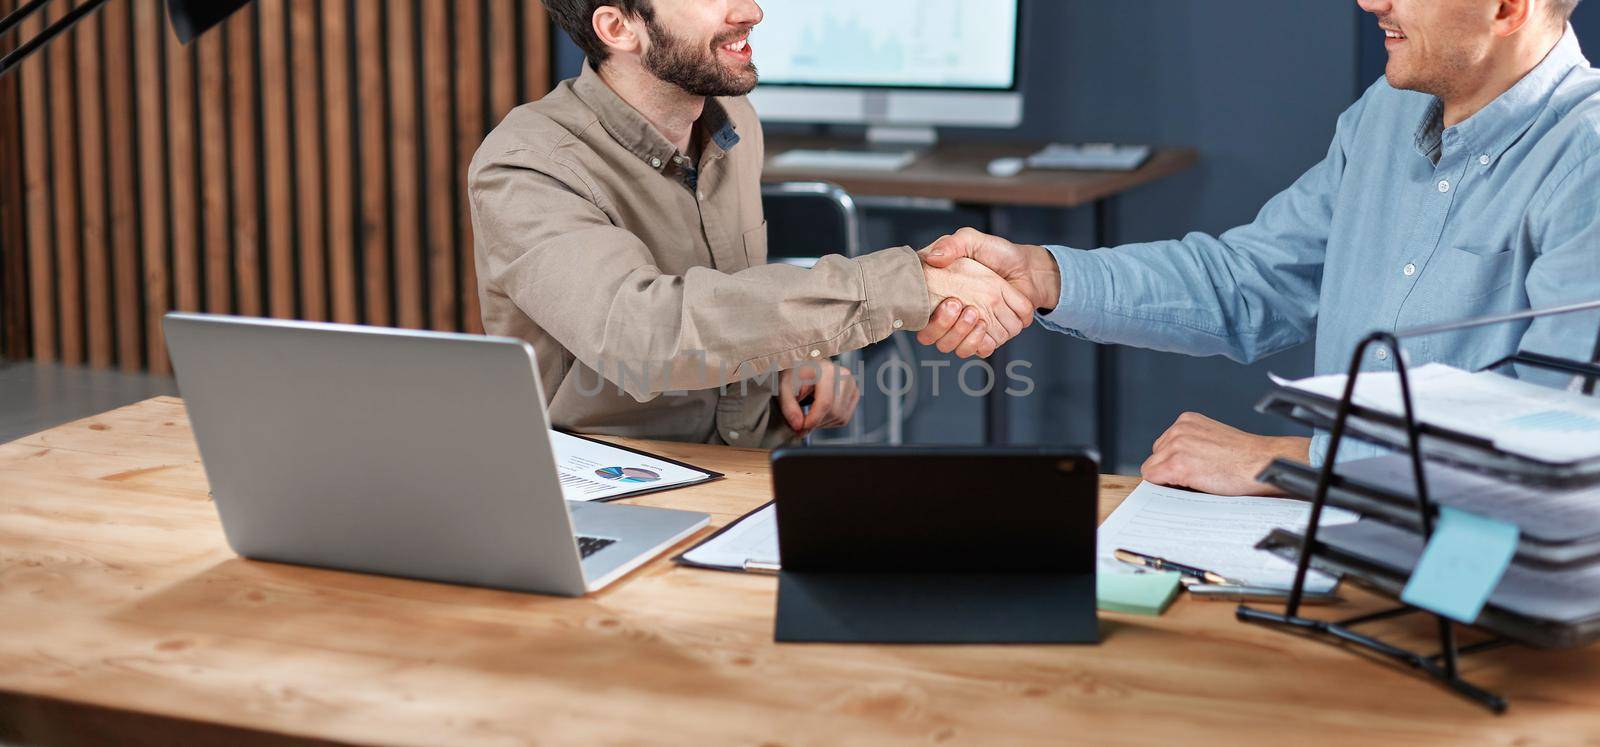 business colleagues congratulating each other with a handshake. close-up.